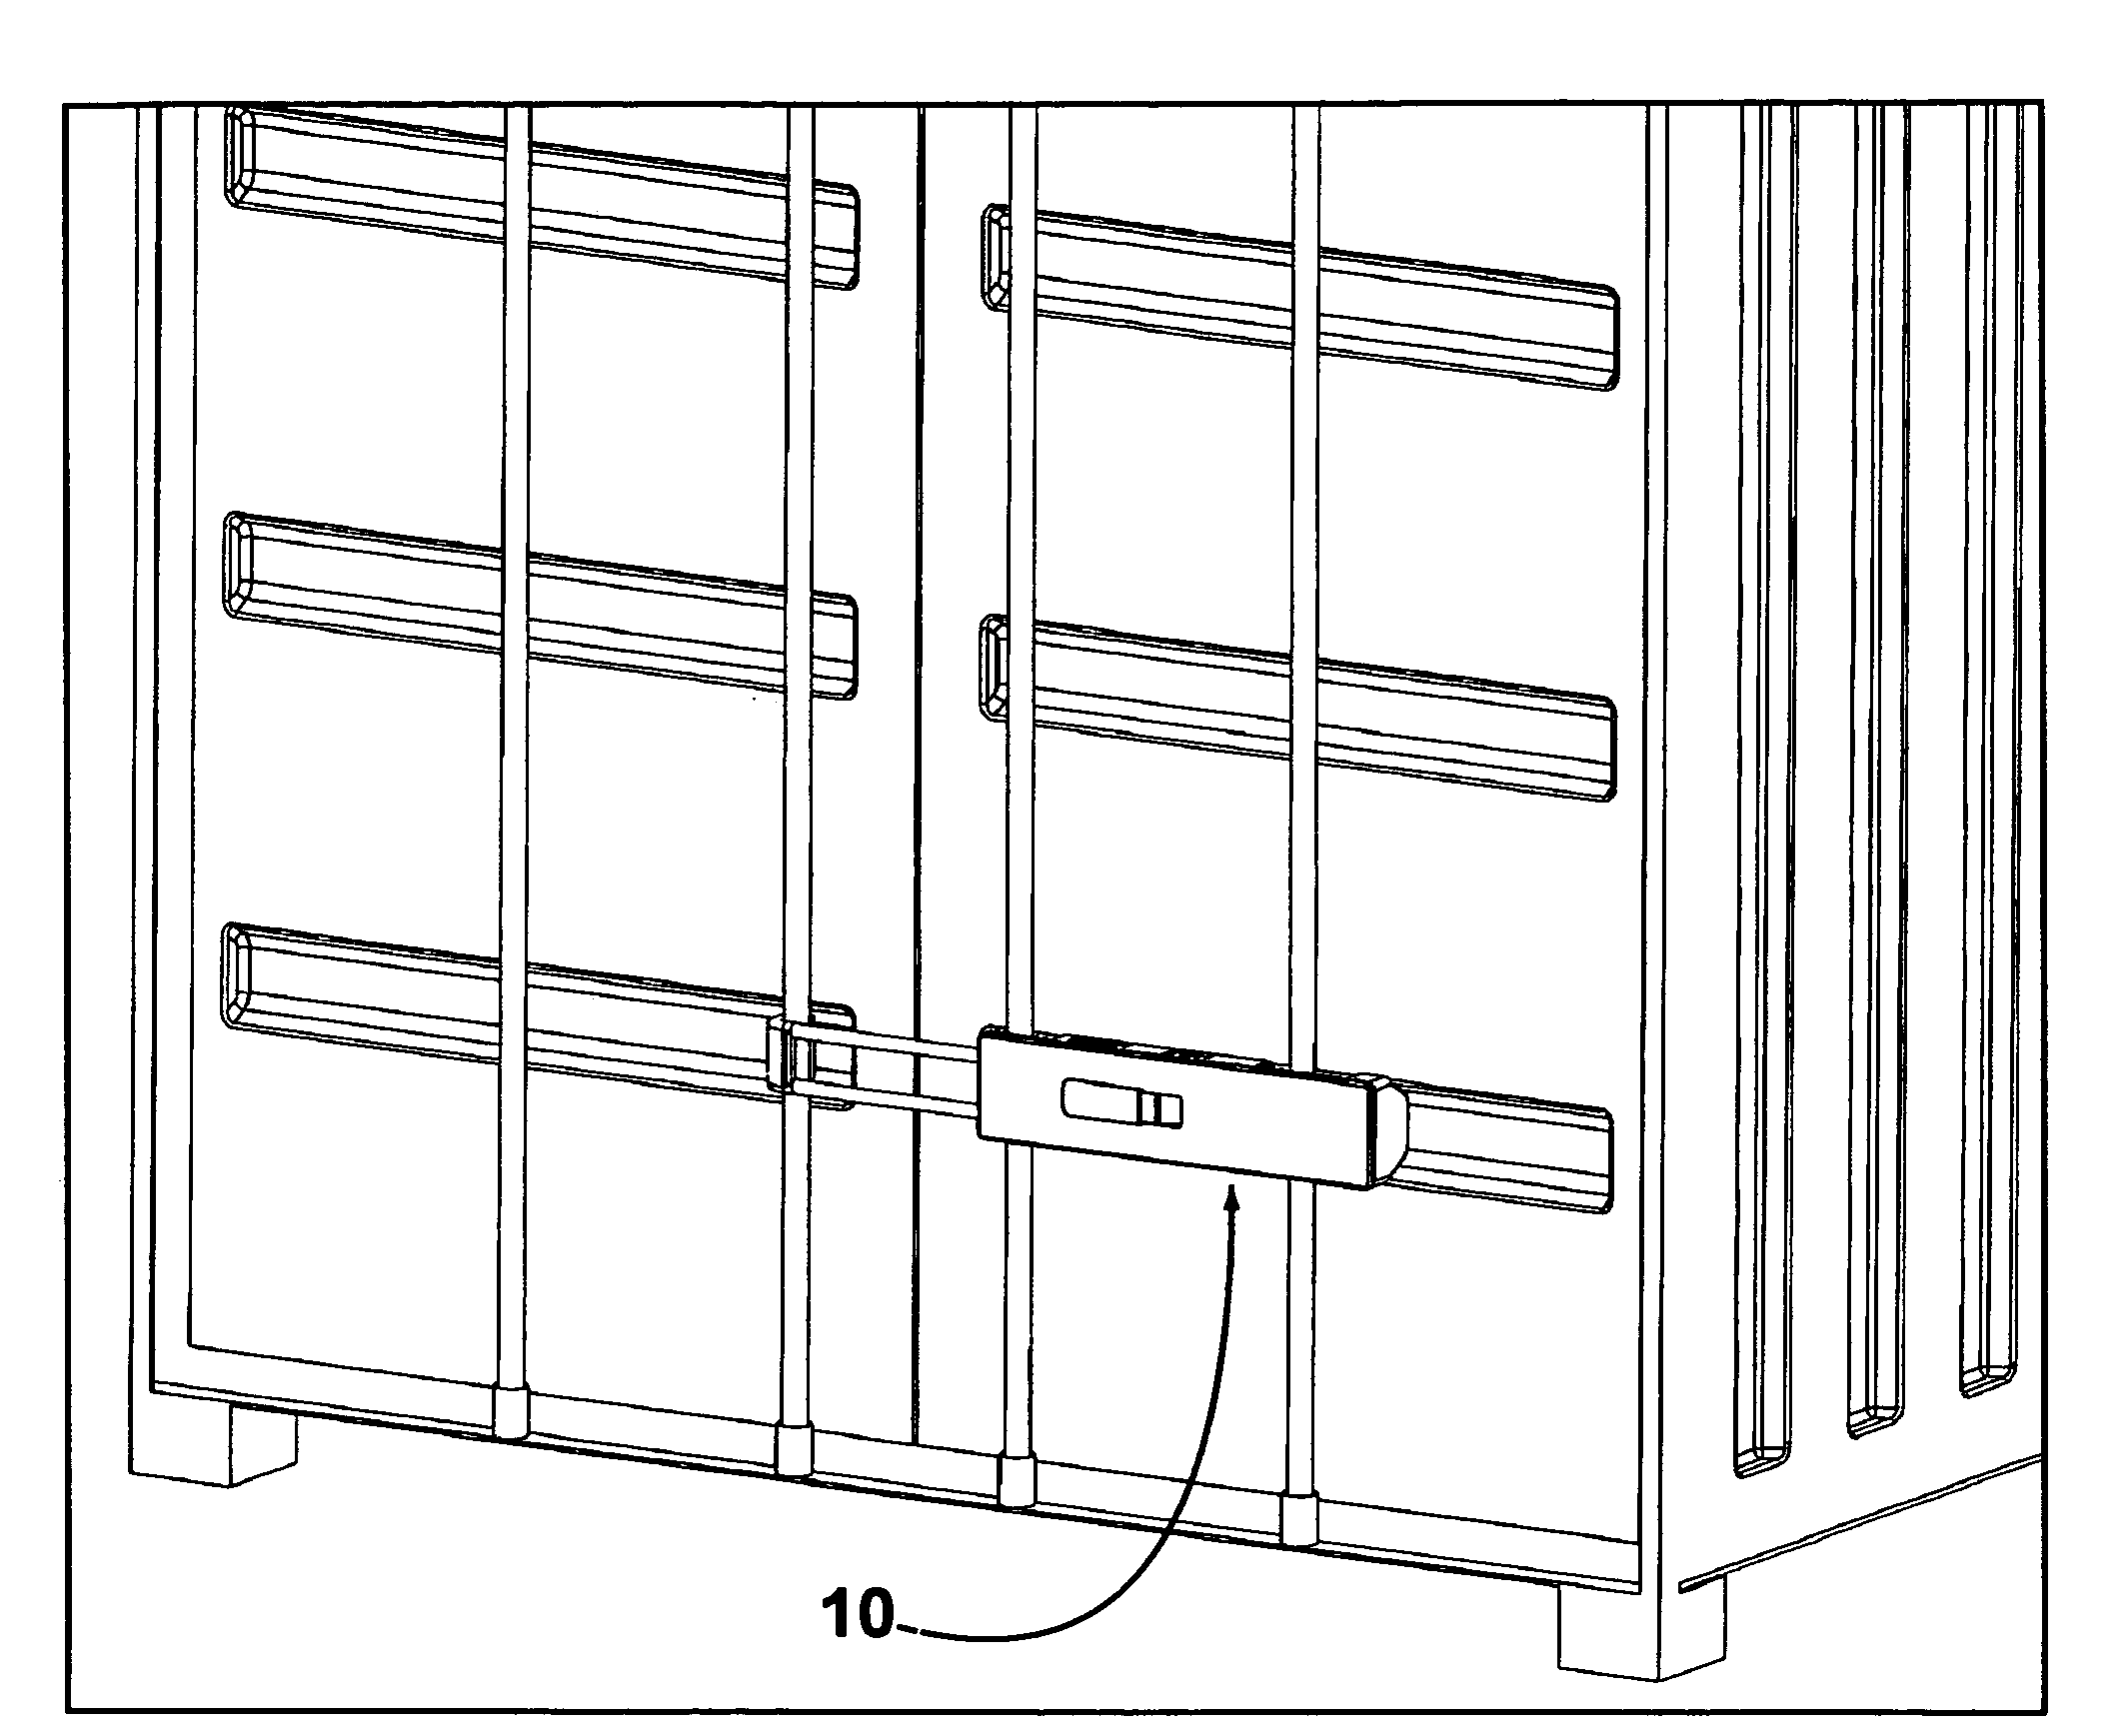 Shipping container having integral geoclock system